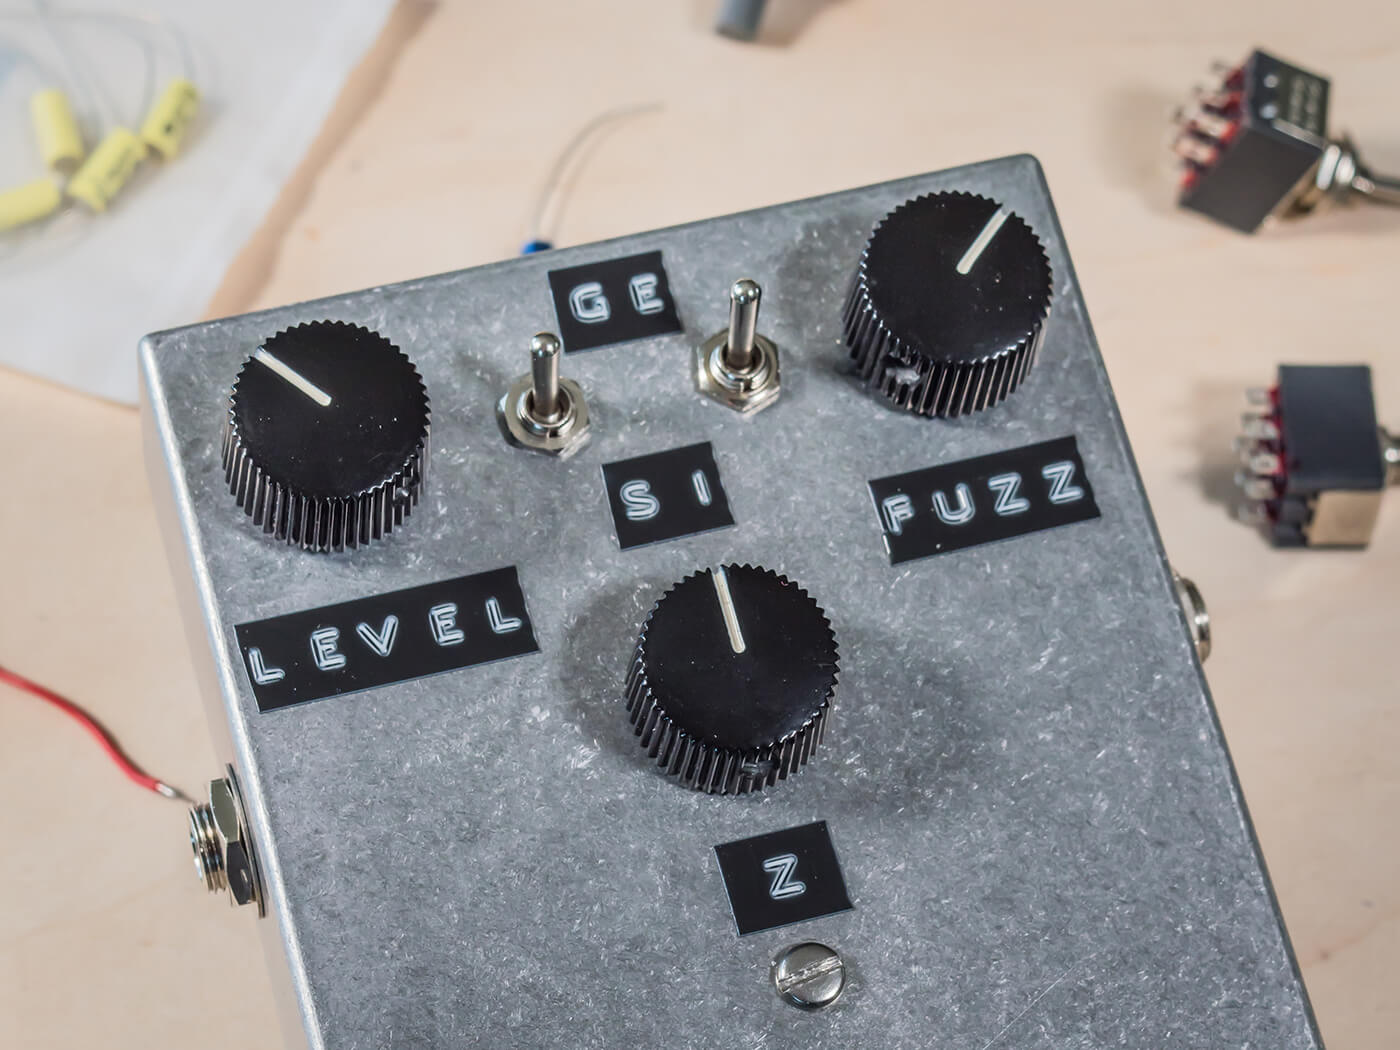 Diy Work Build Your Own Fuzz Pedal